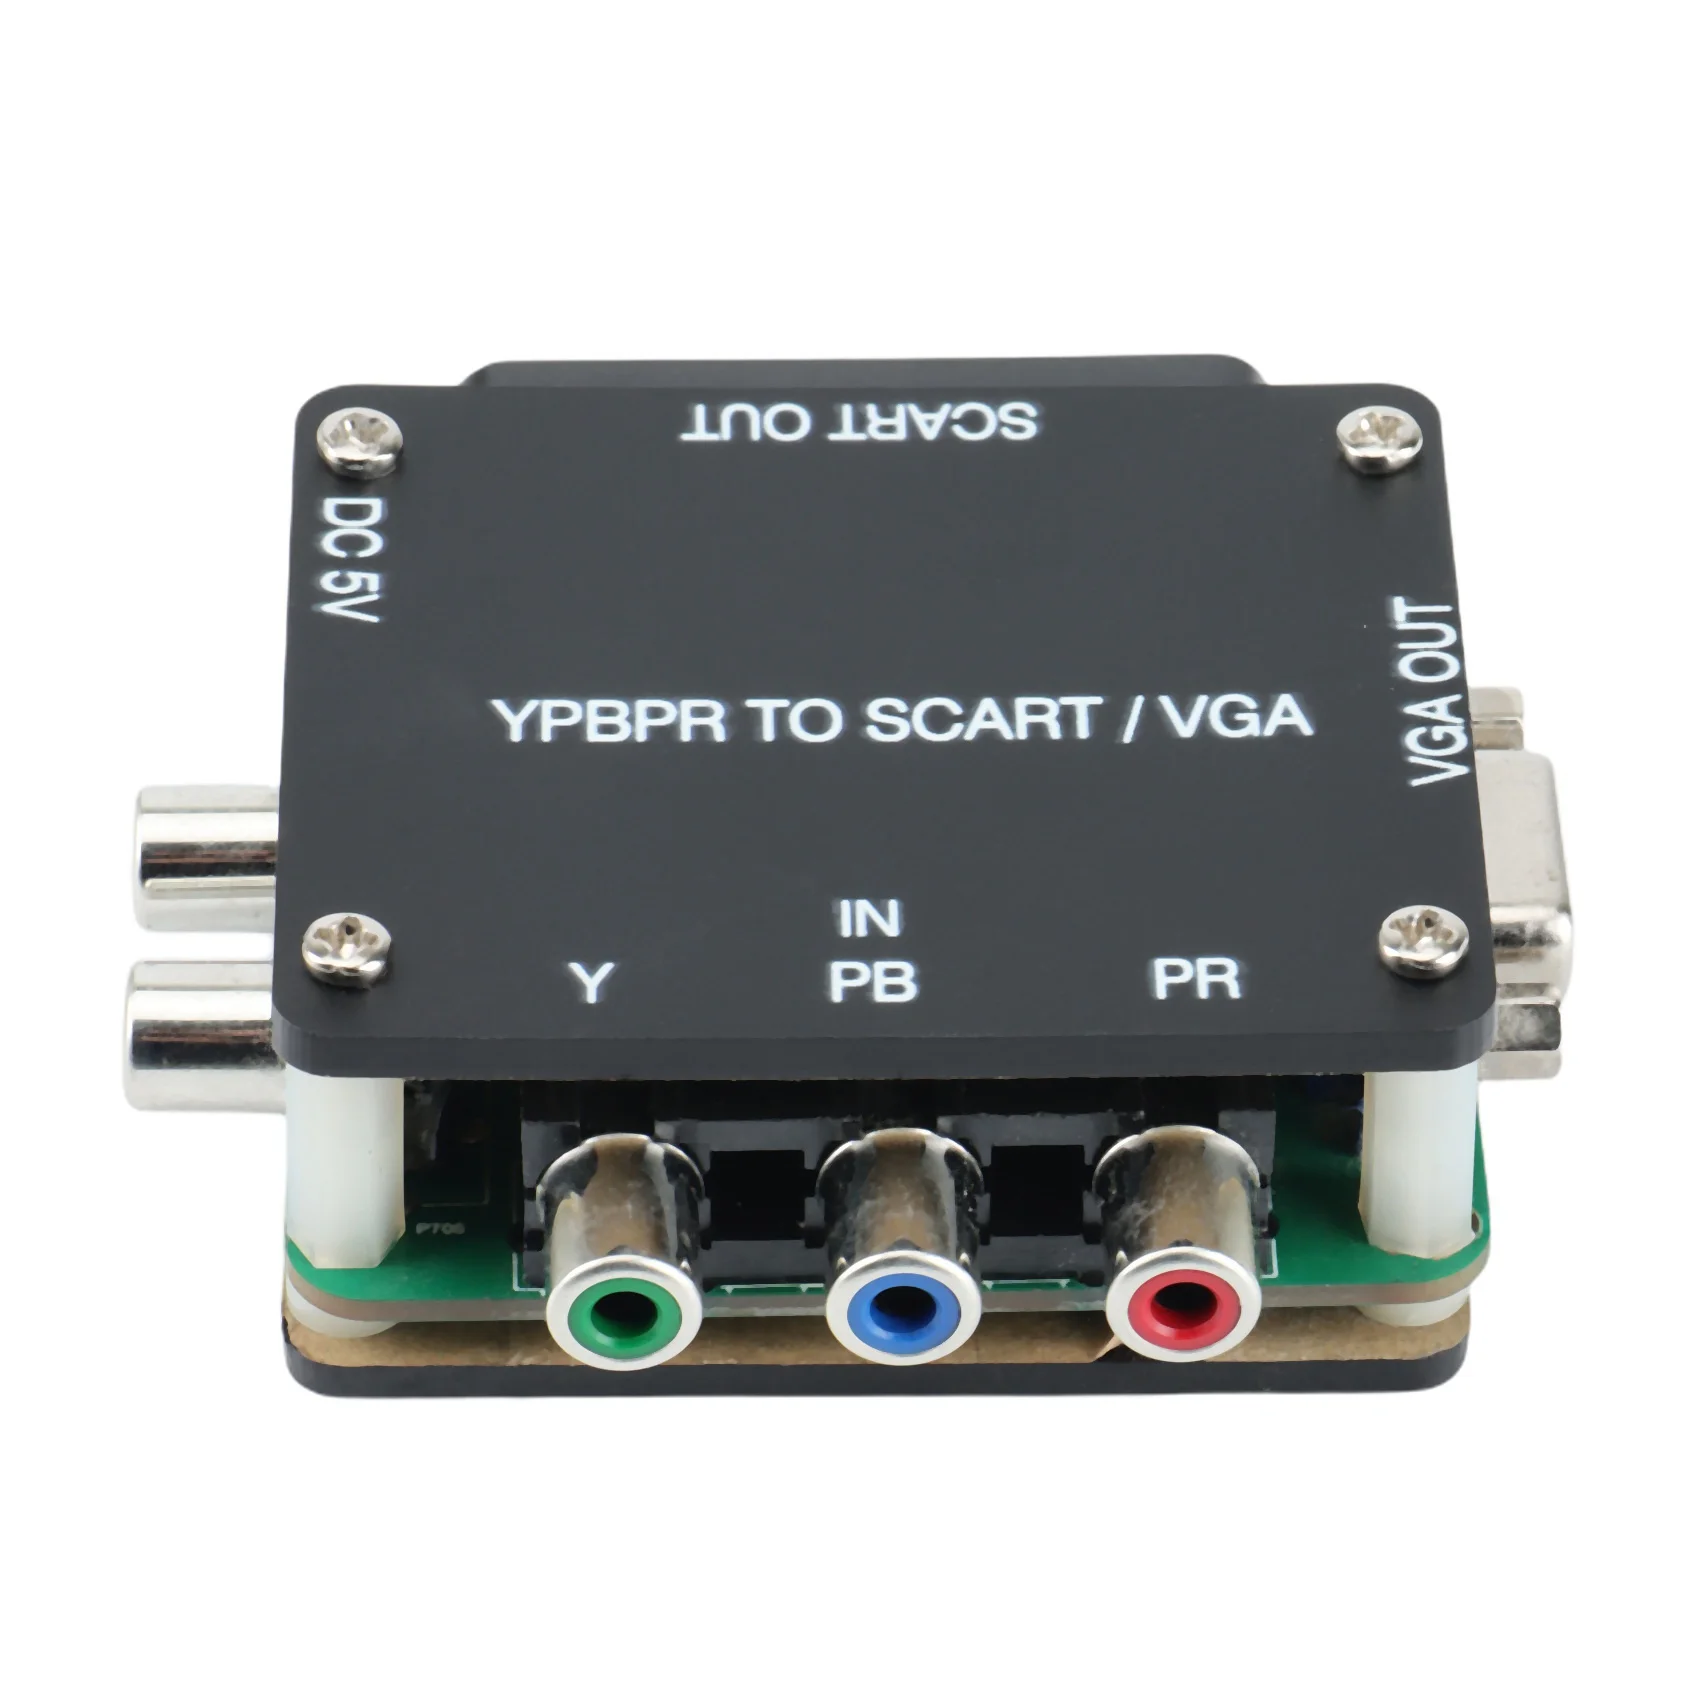 

YUV TO RGBS YPBPR to SCART YPBPR TO VGA Component Transcoder Converter Game Console, RGBS to Color Difference Component